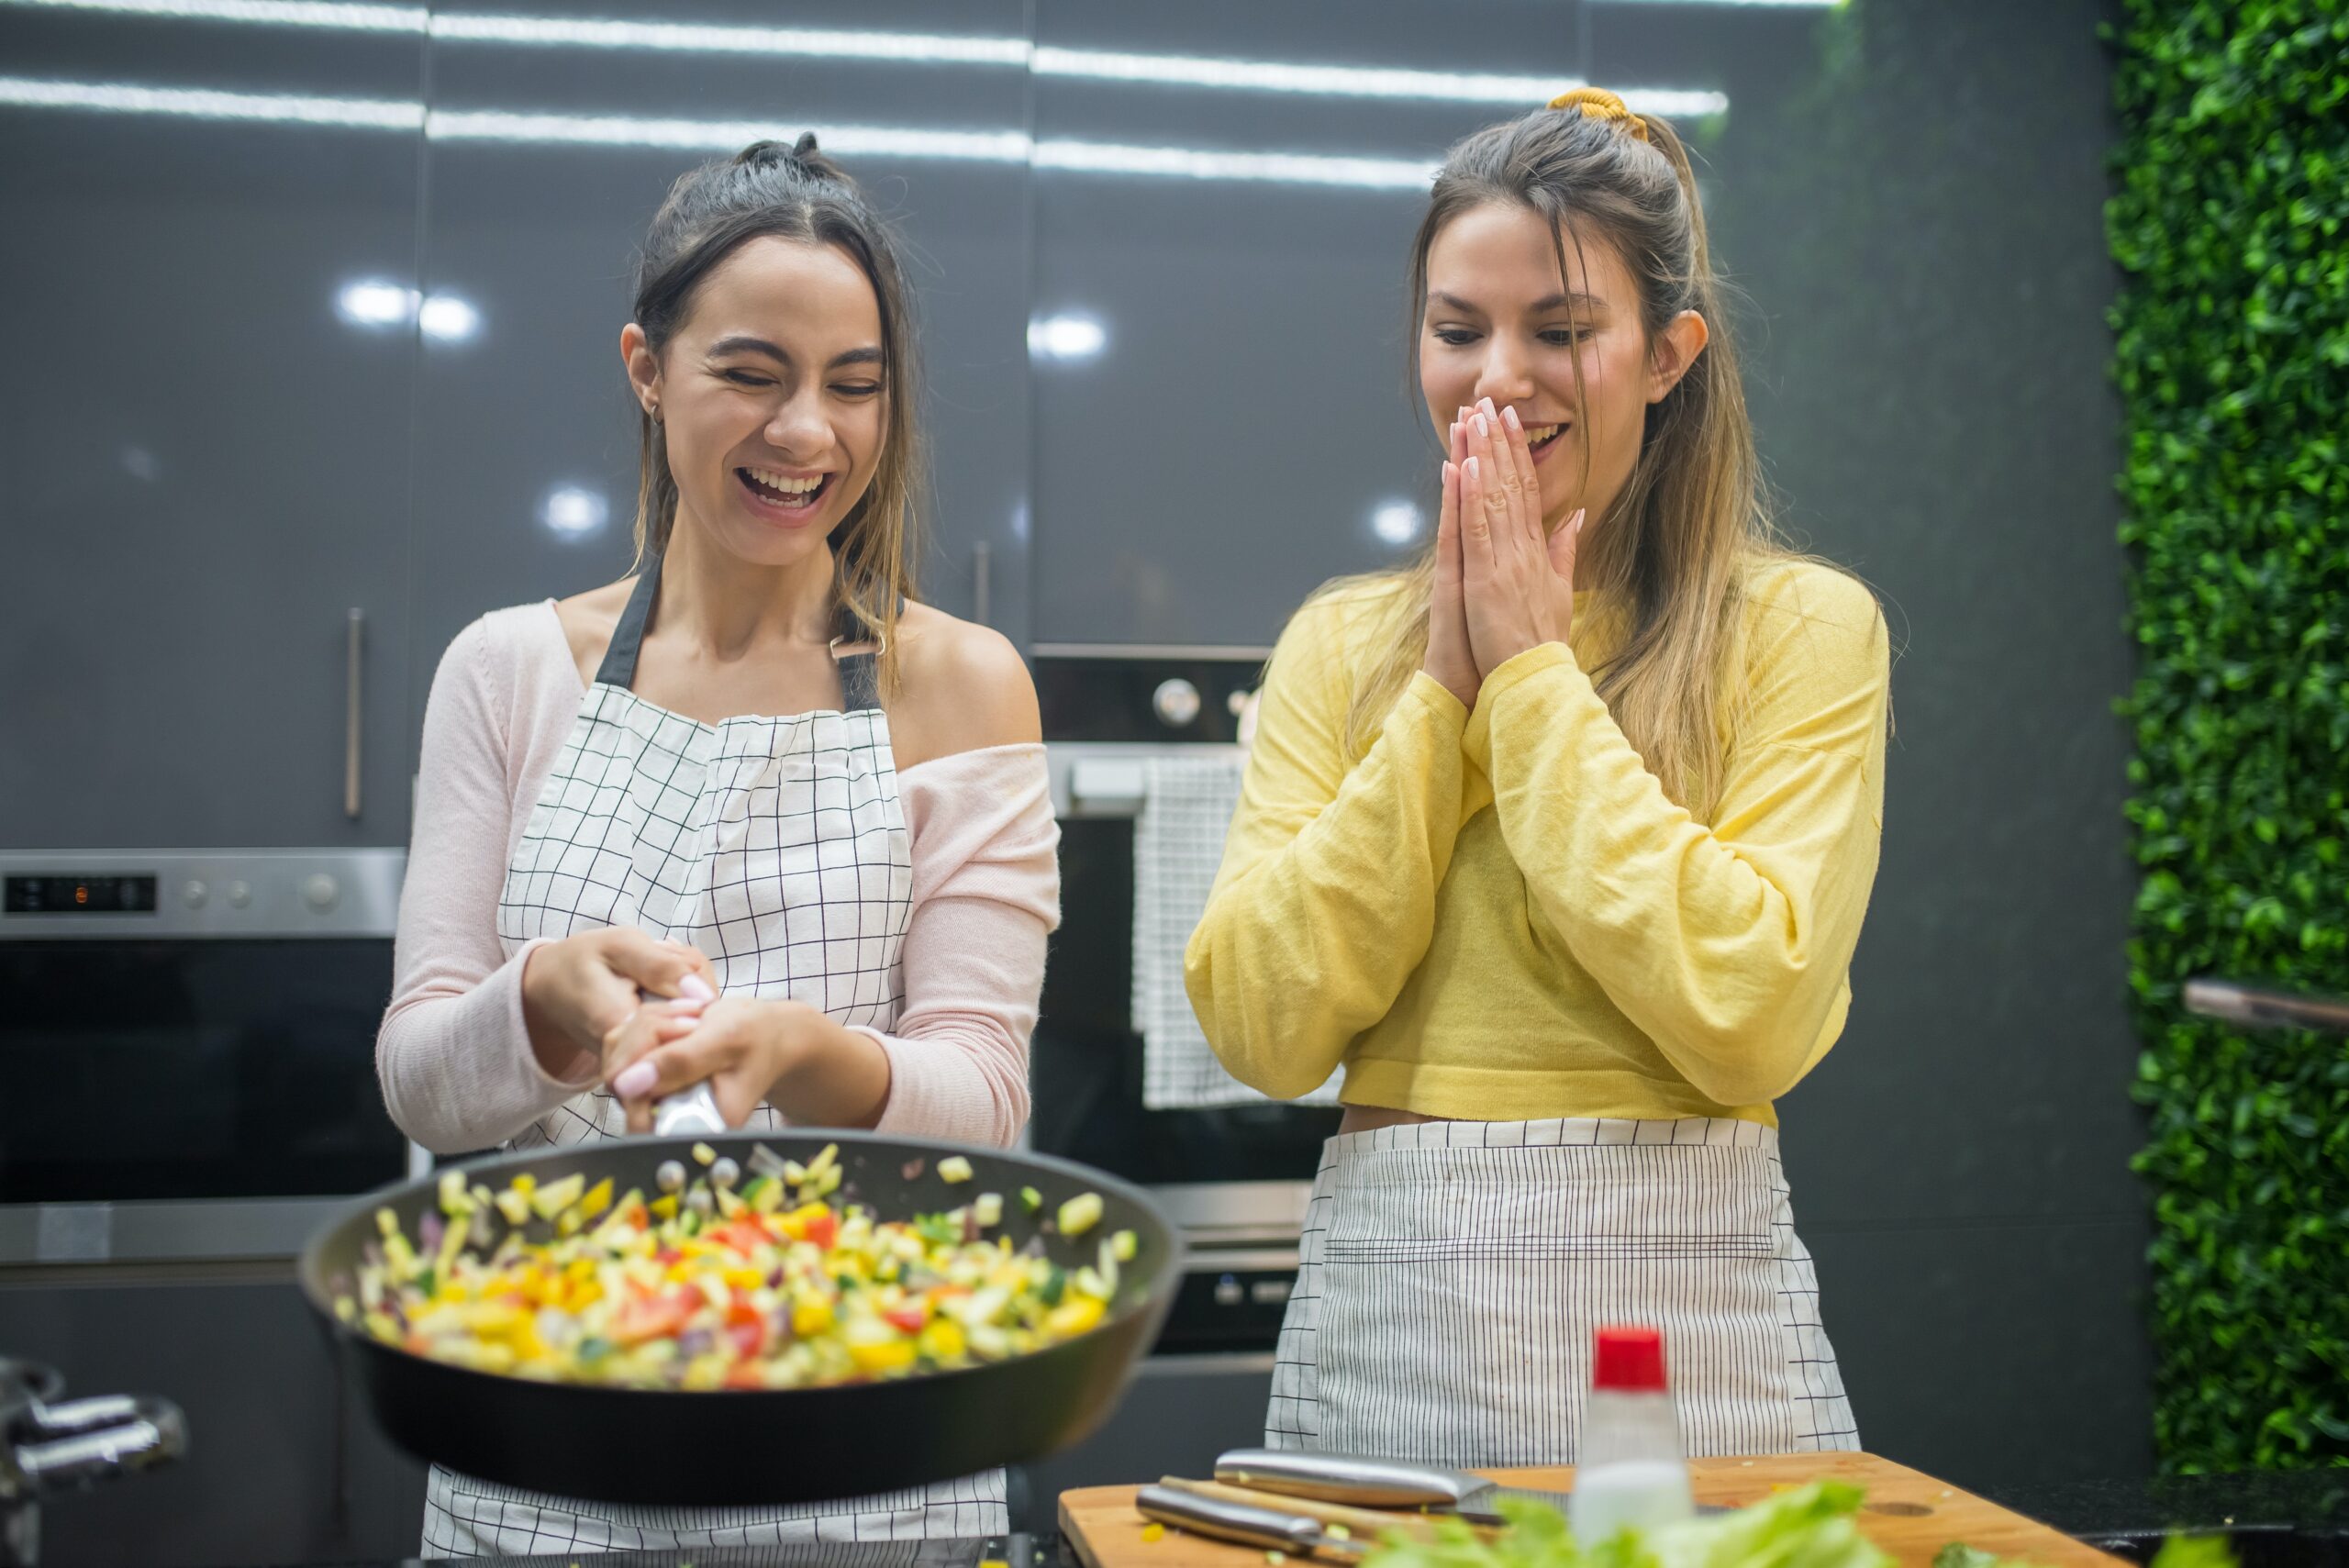 Fire safety quiz - kitchen safety. Two young women smiling whilst one woman tosses vegetables in a frying pan.